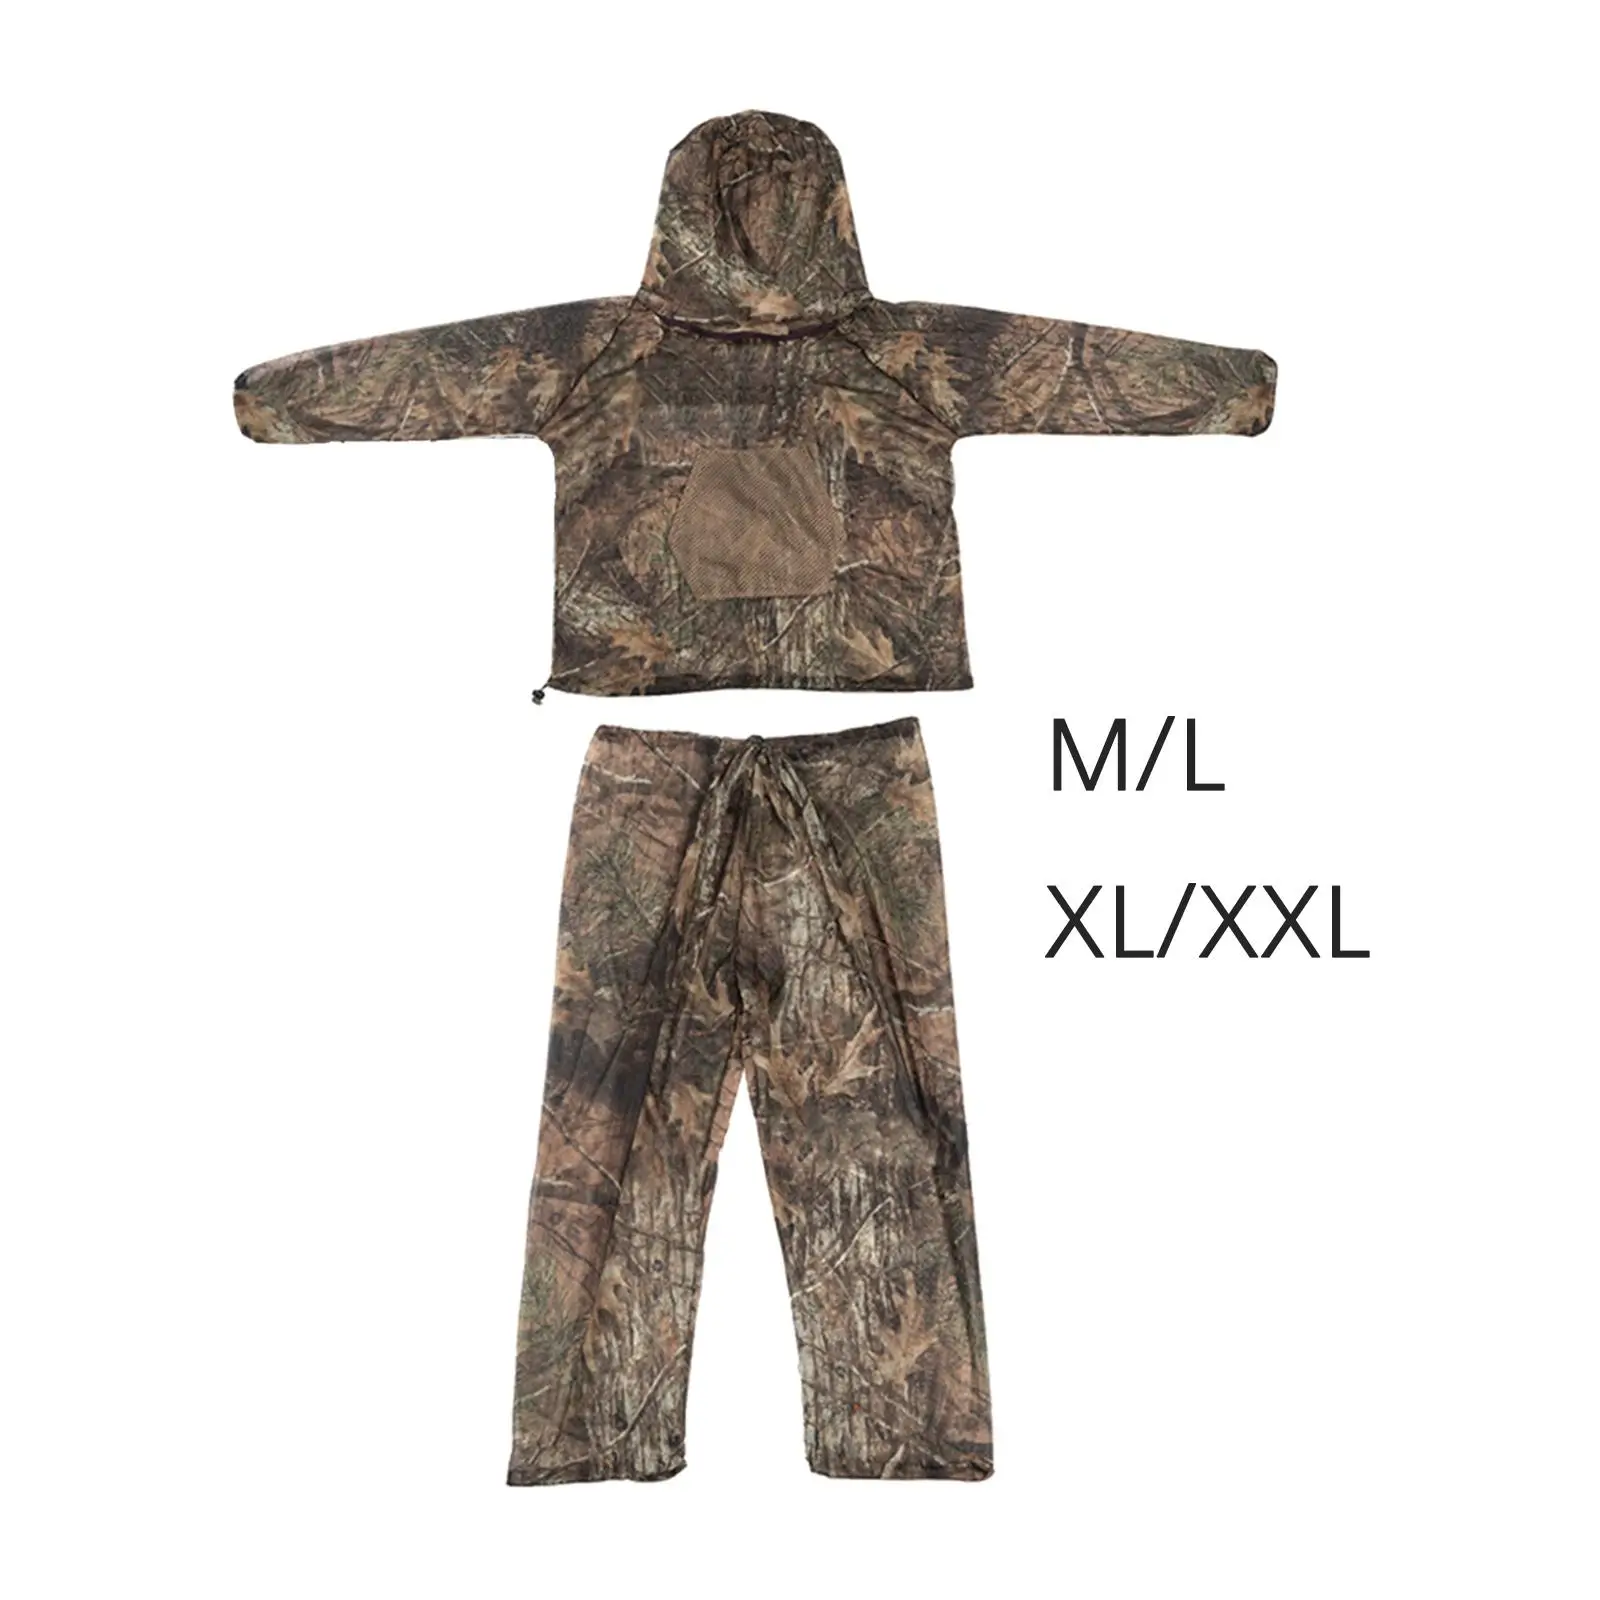 Mesh ed suits protection Lightweight Pants for Camping Hunting